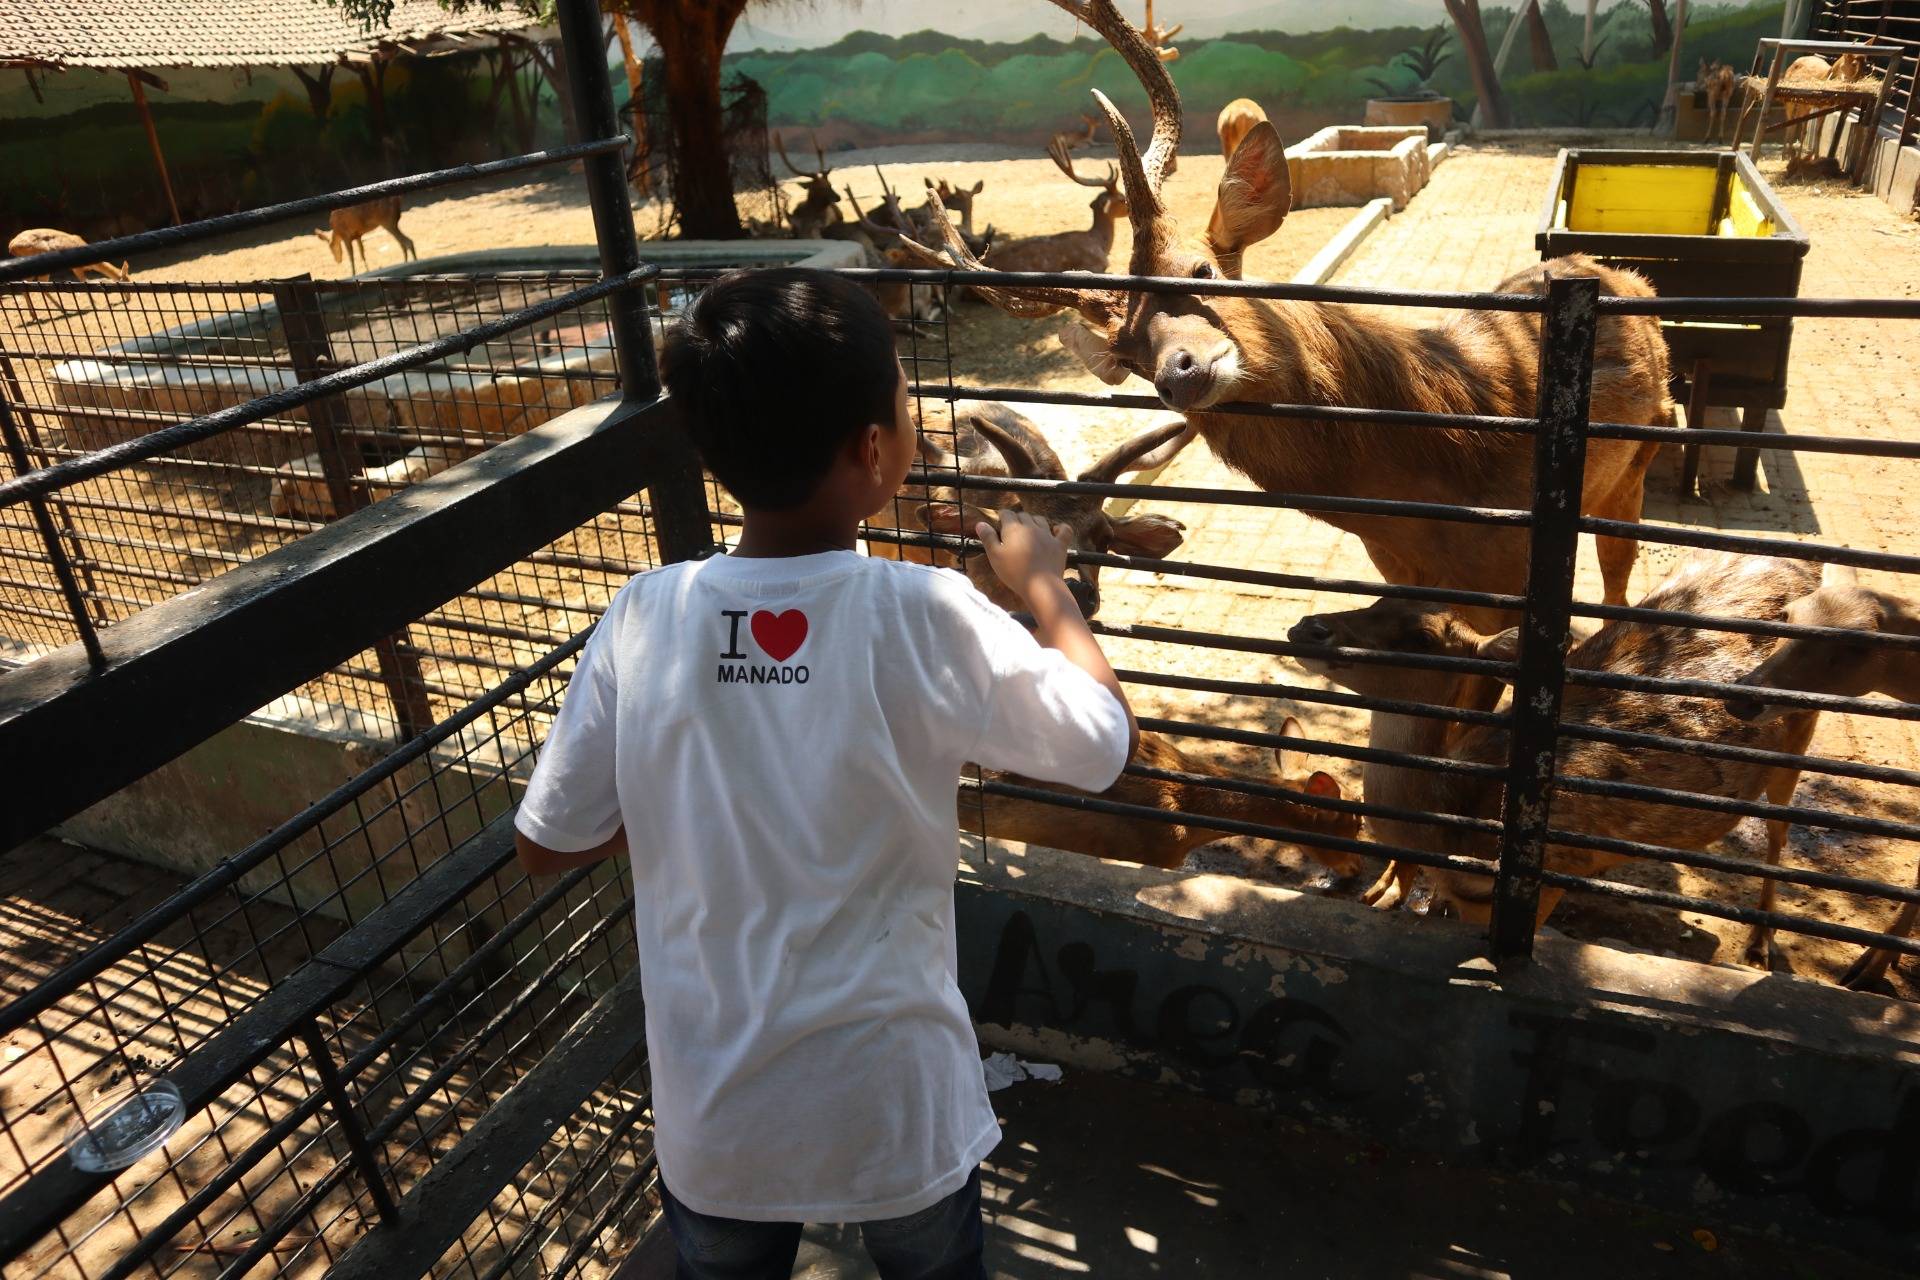 Exciting Adventure at Surabaya Zoo: Riding the Train to a Dream Destination